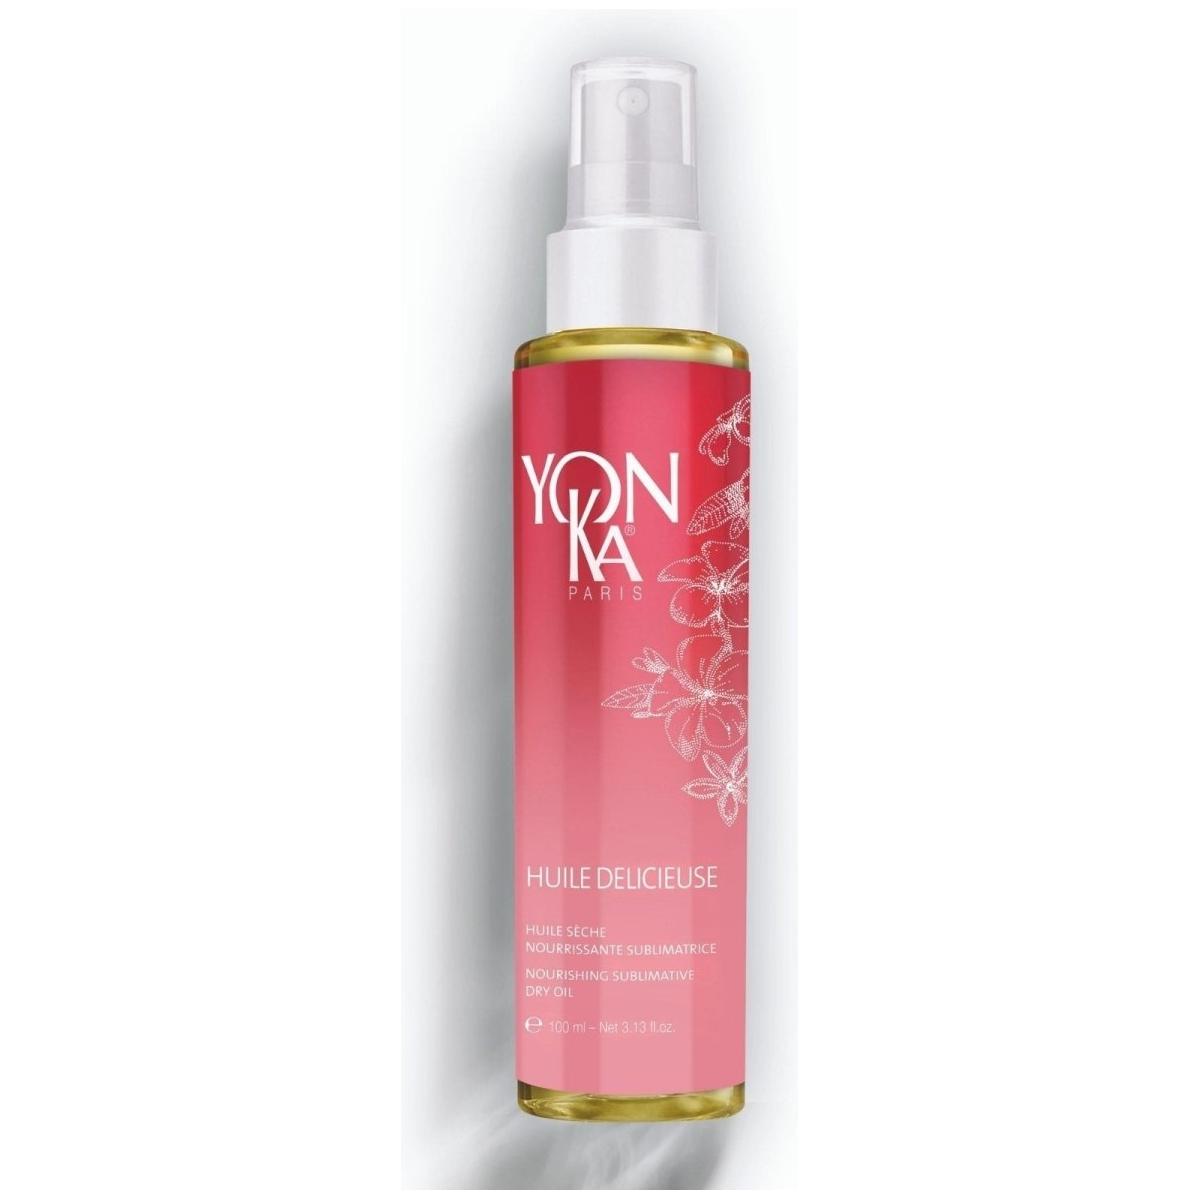 Yonka Paris | Huile Delicieuse Relax Dry Oil - DG International Ventures Limited